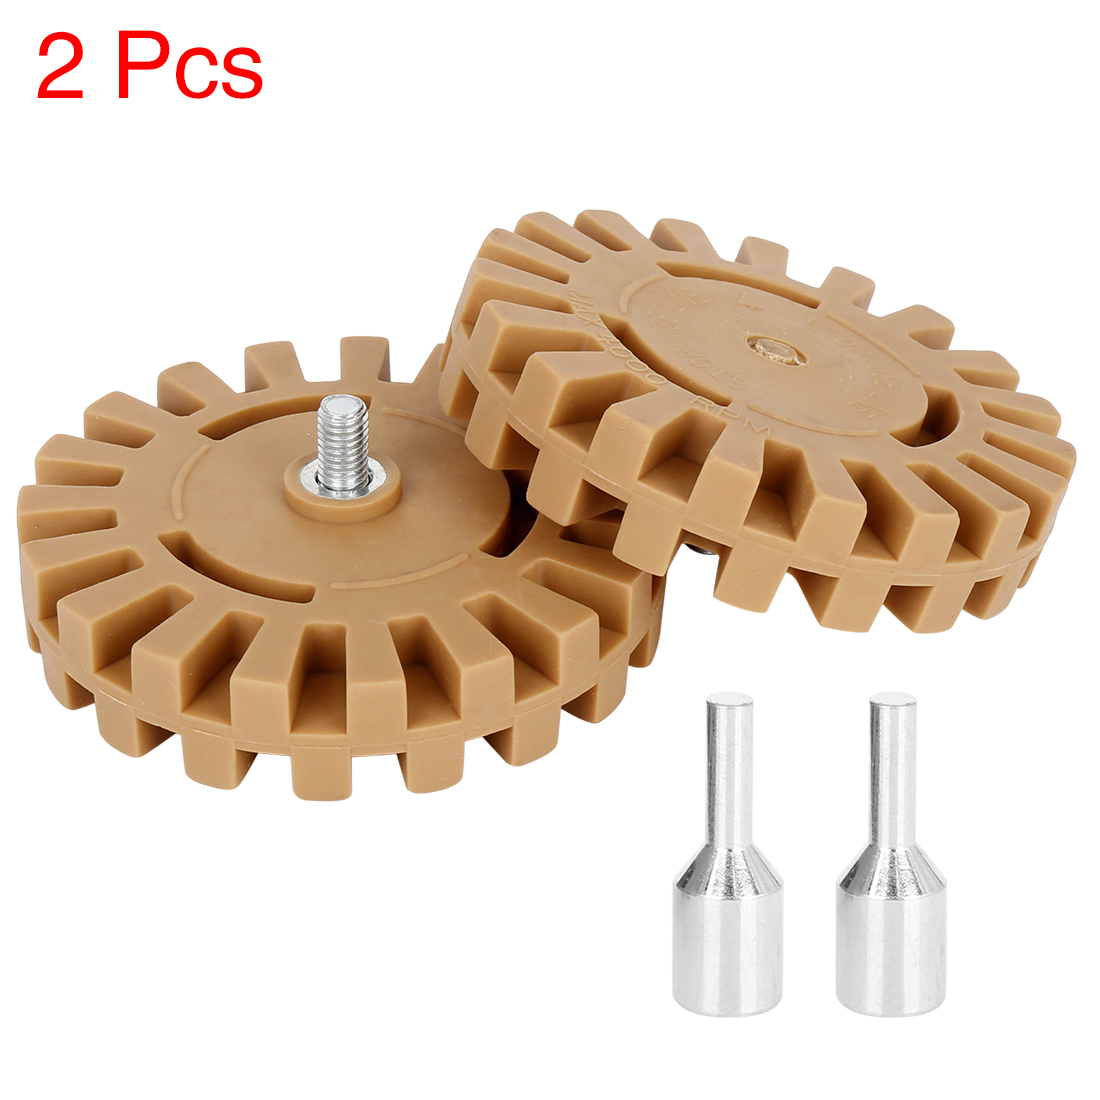 Unique Bargains 4" Car Rubber Eraser Wheel Decal Removal with Drill Adaptor Thickness 20mm 2pcs